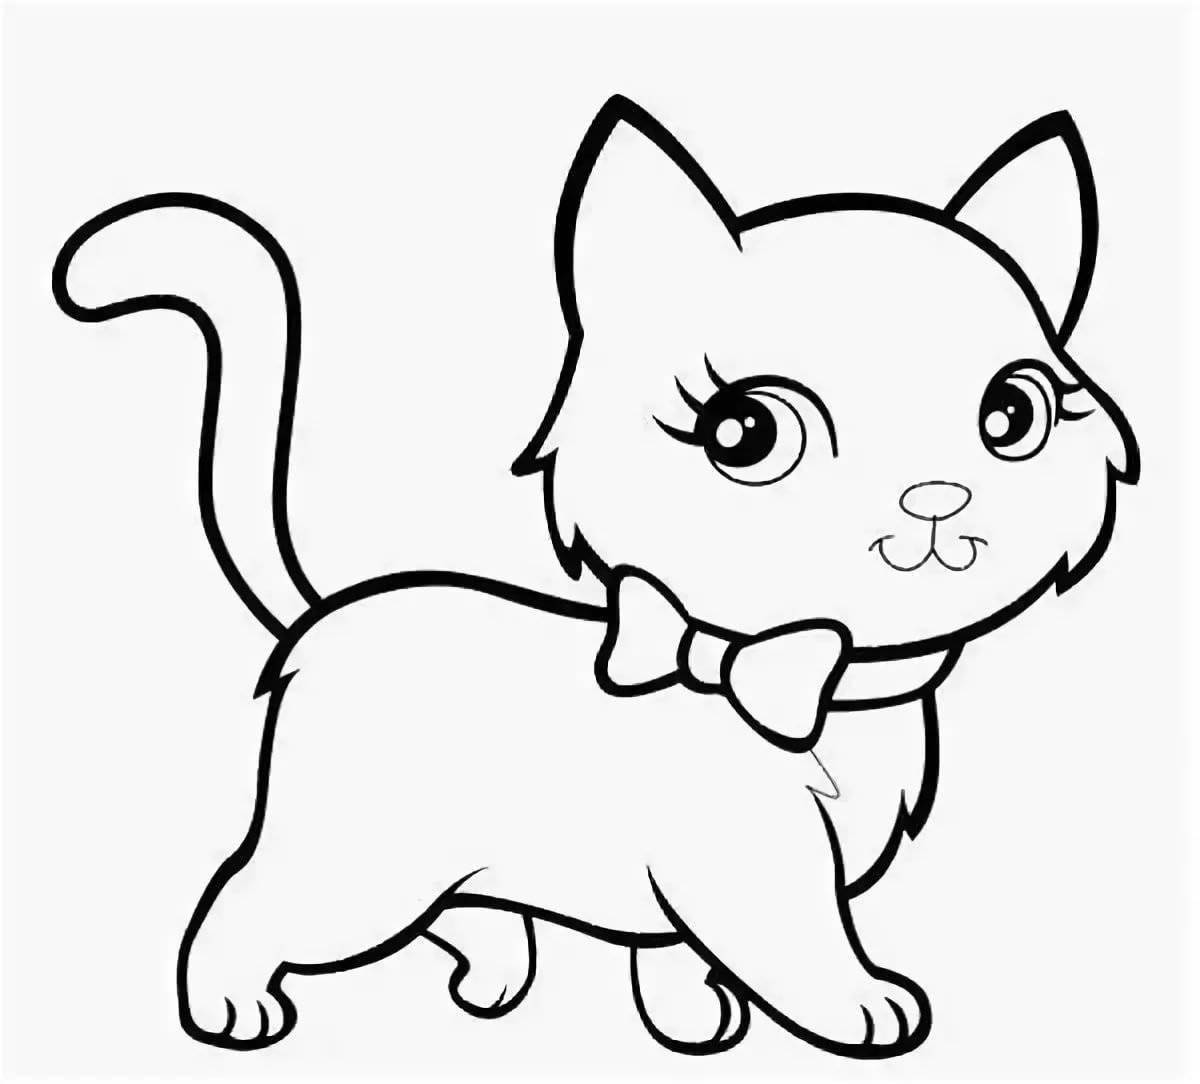 Adorable little cat coloring page